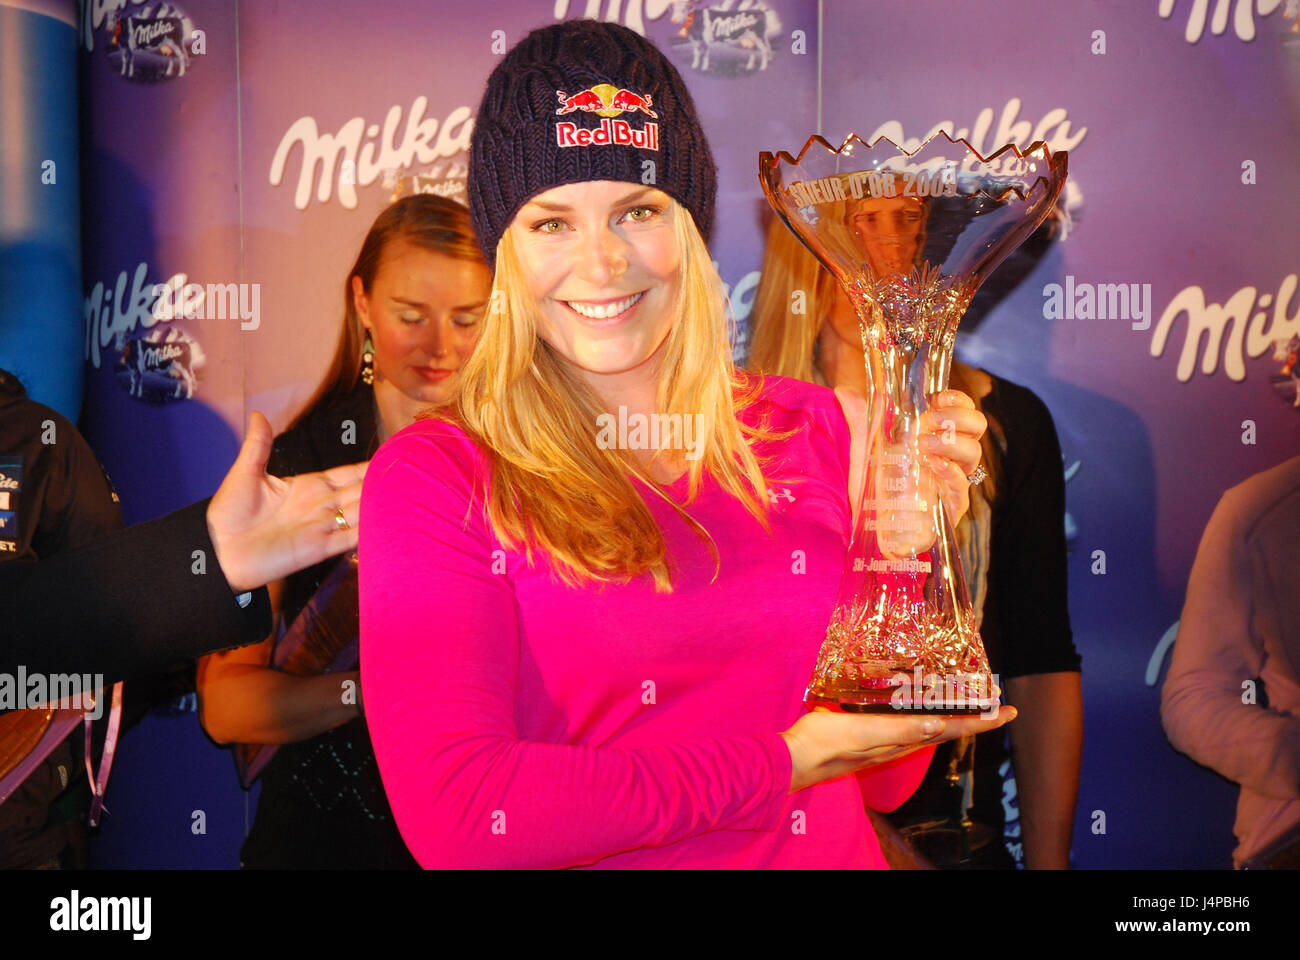 Winter sports, ski Alpine, ski racer Lindsey Vonn USA, world champion, Olympic champion, portrait, cup, Skieur D` Or, no model release, only editorially, no property release, Stock Photo